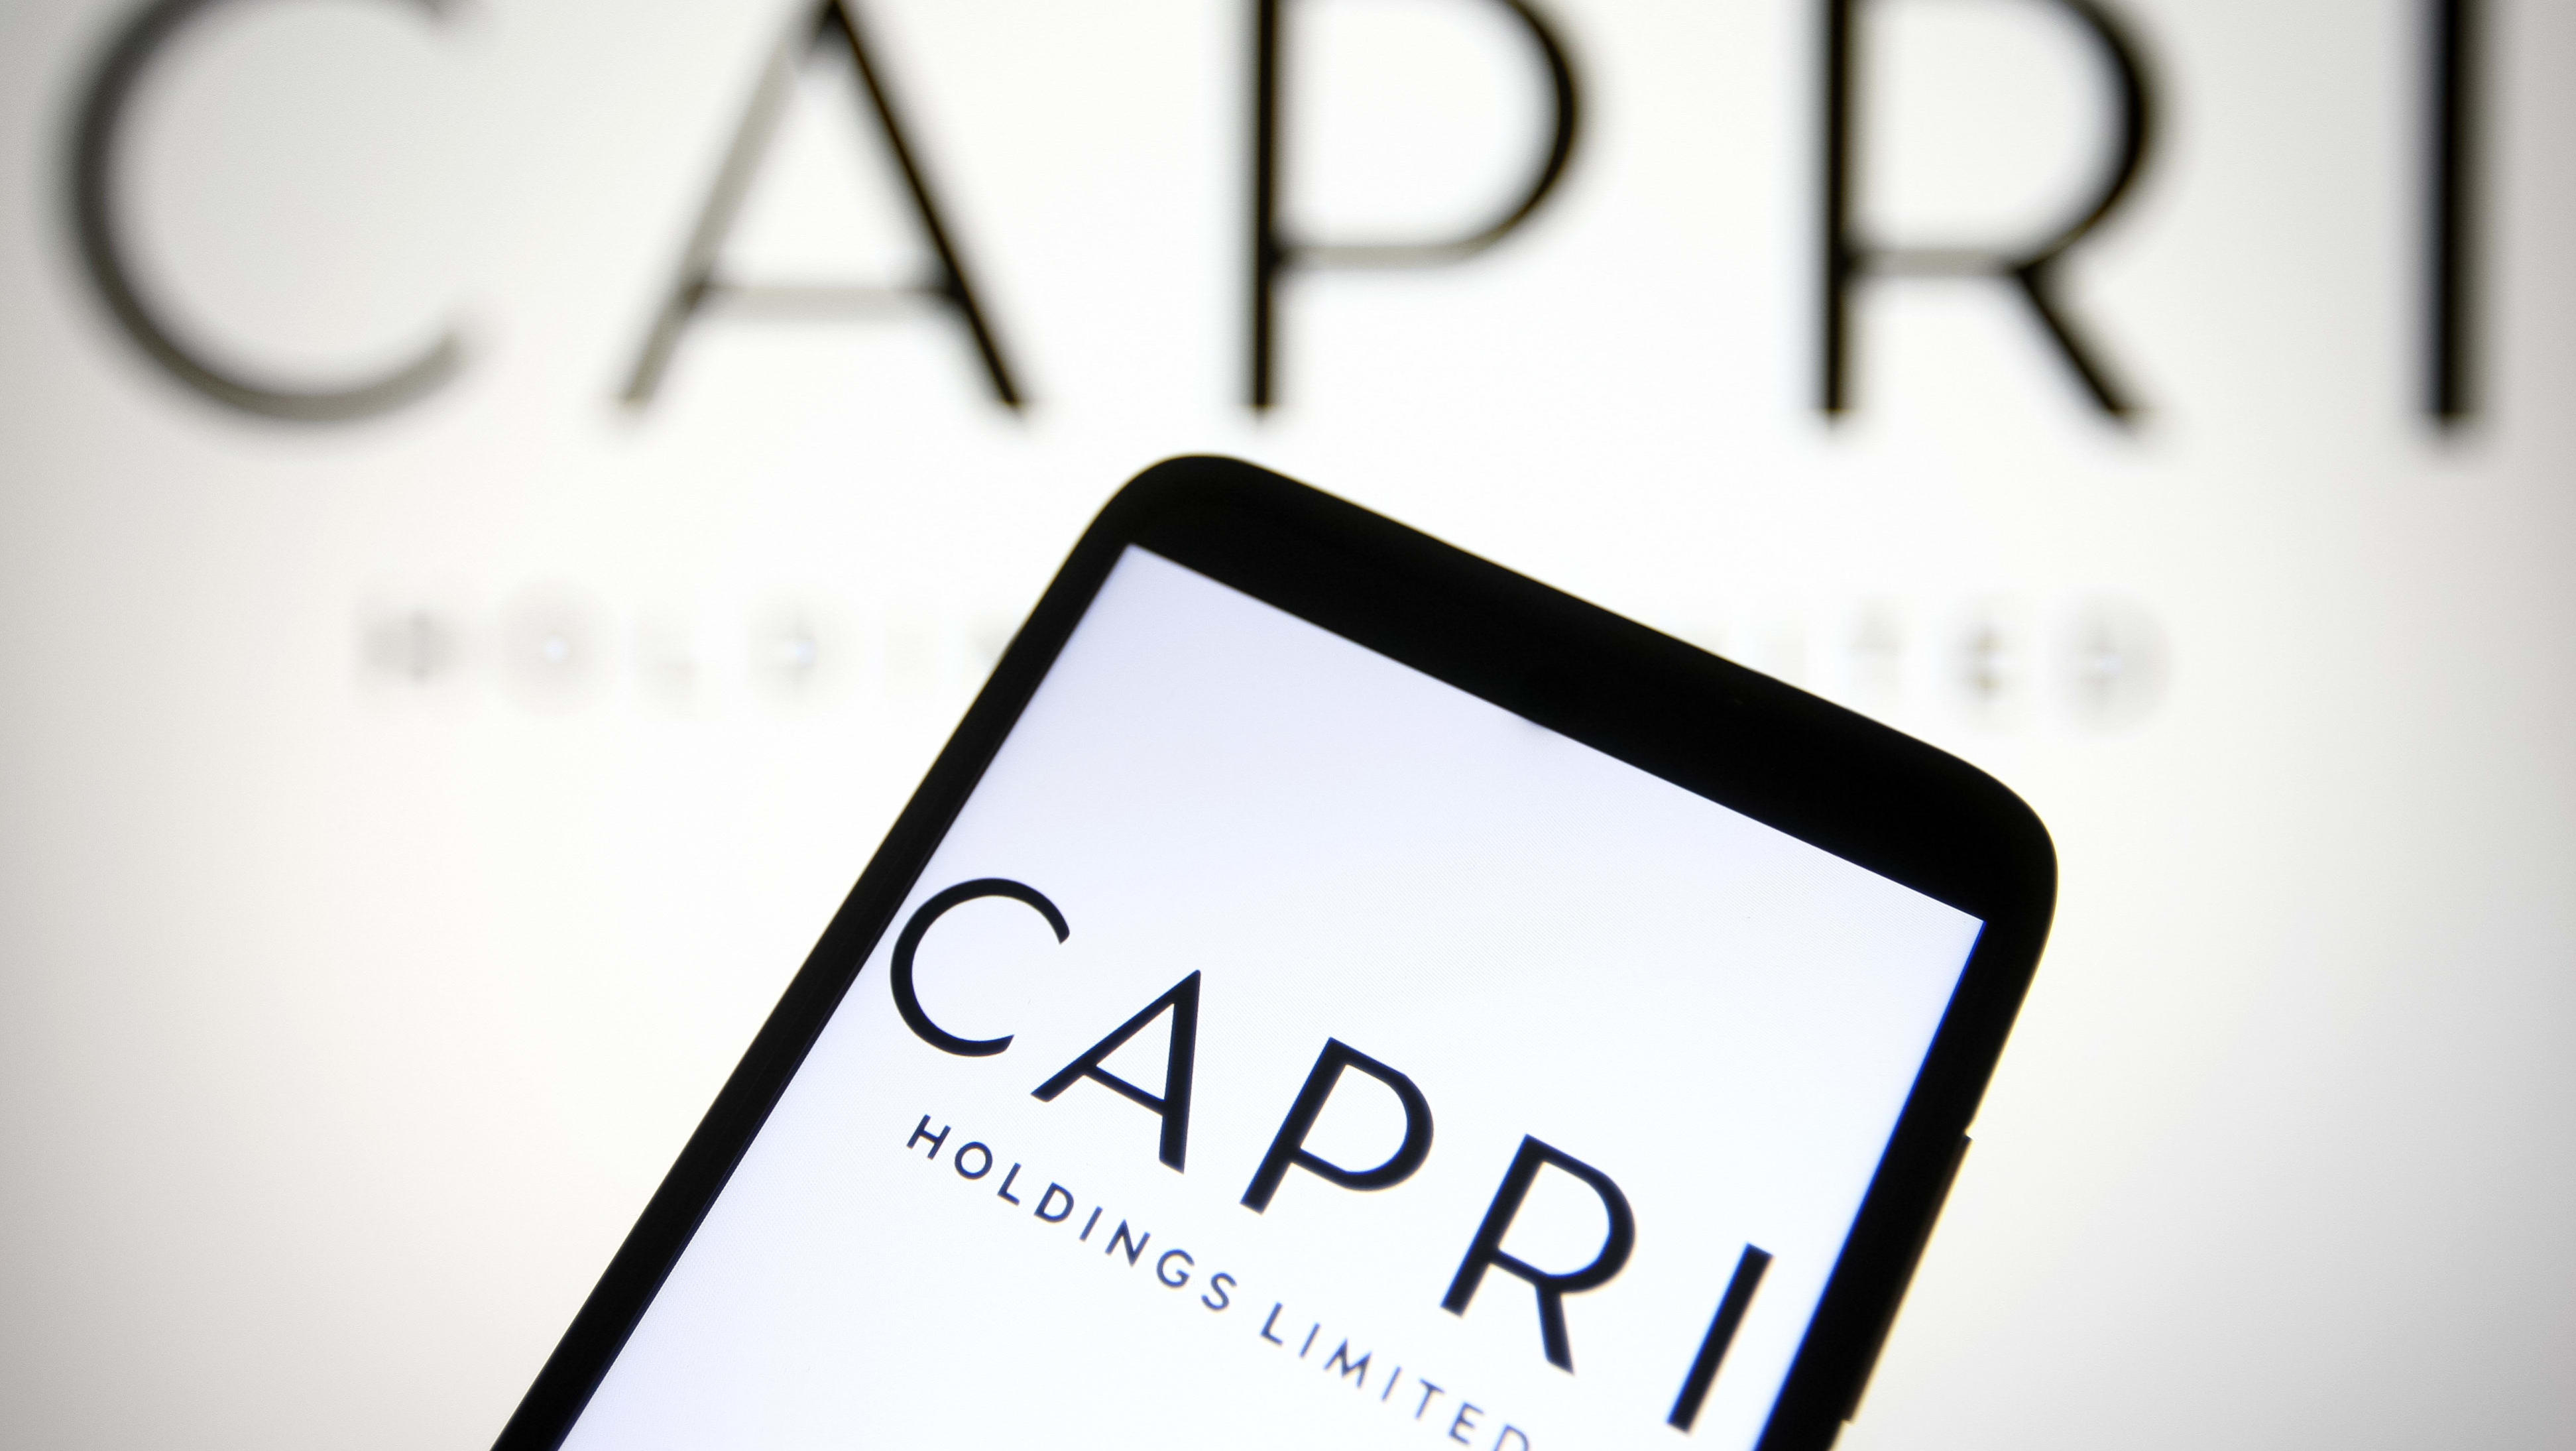 Capri Holdings: Michael Kors Brand Is Weighing Down The Company